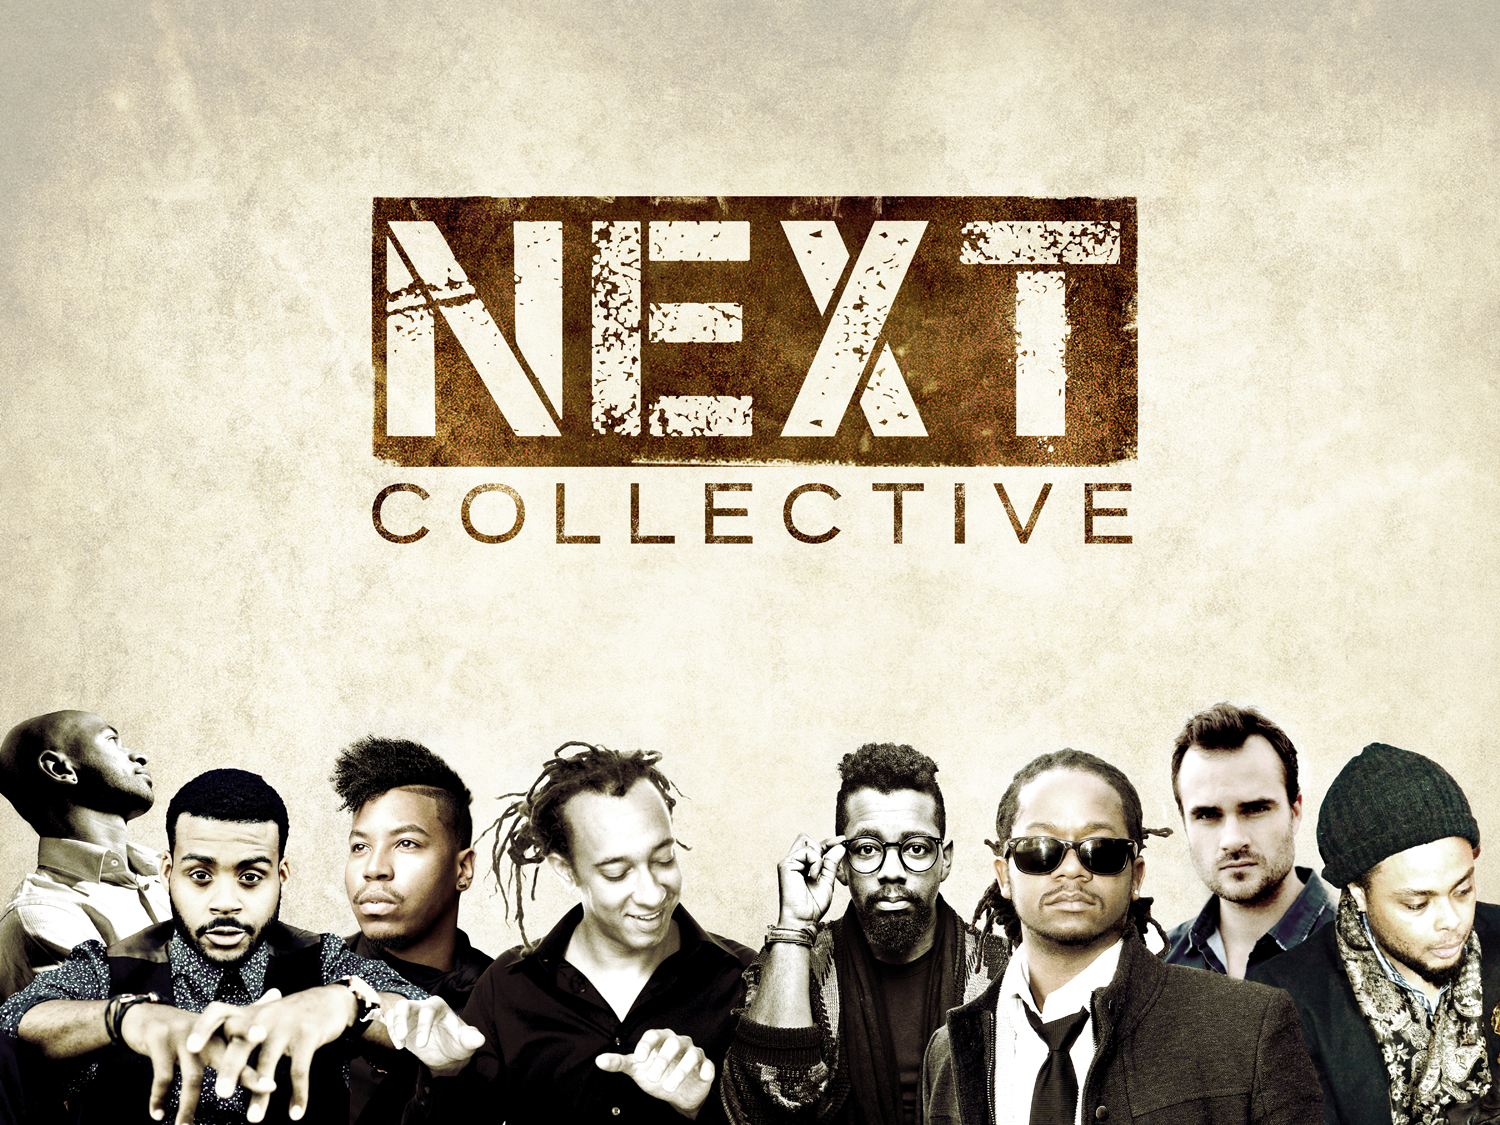 Next collection. Collective. Named Collective.